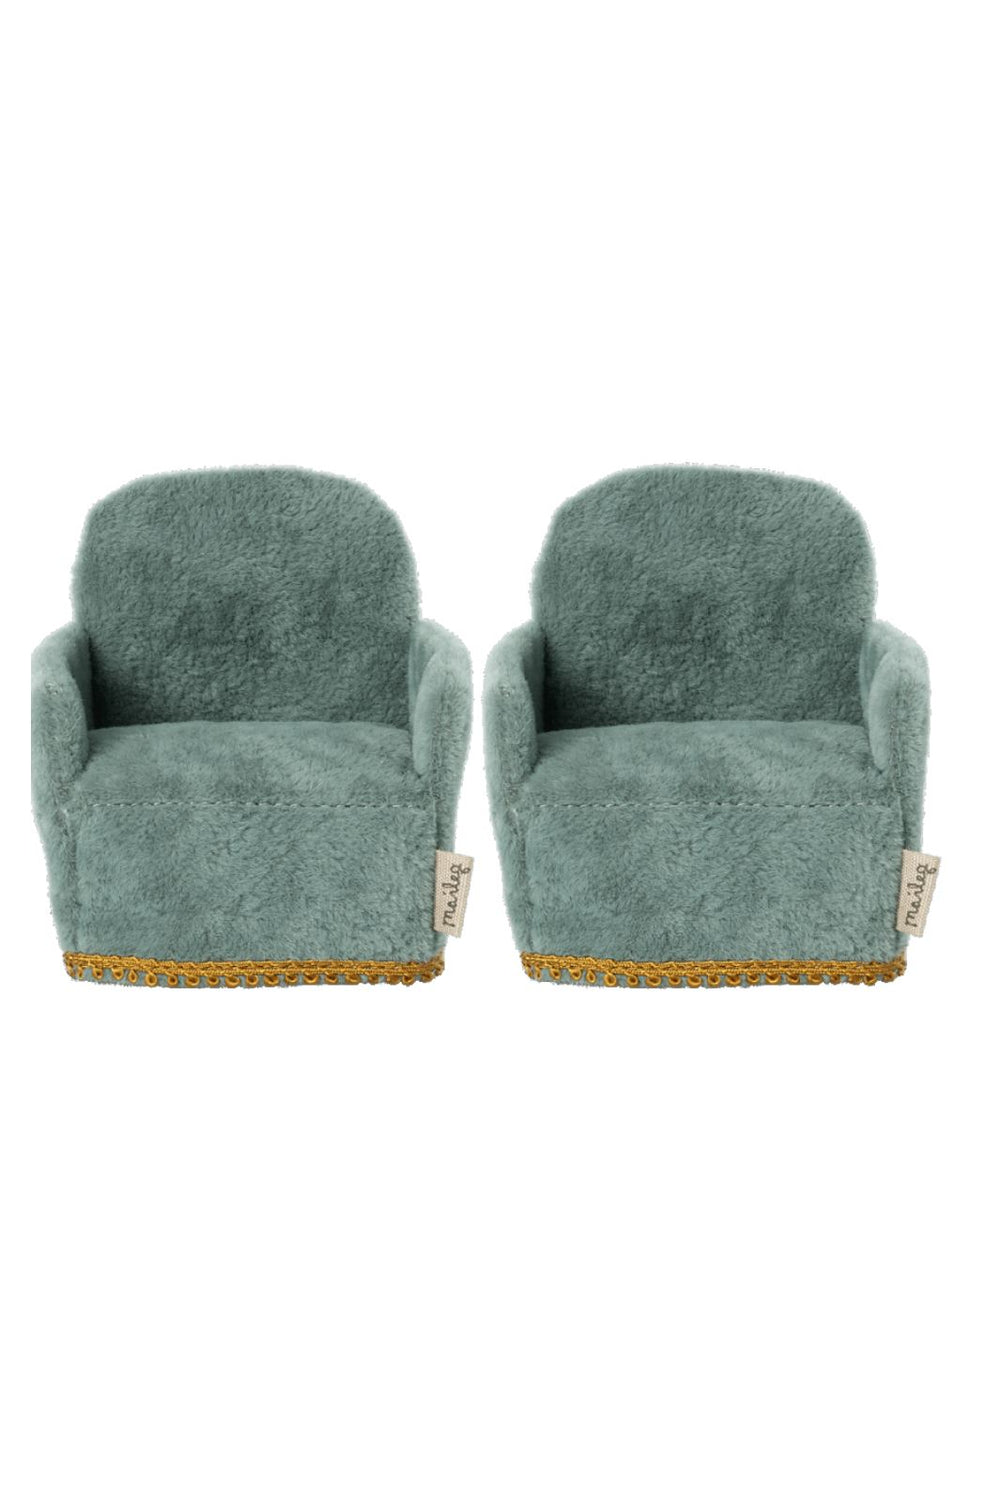 Maileg - Chair - 2 Pack , Mouse Legetøj 